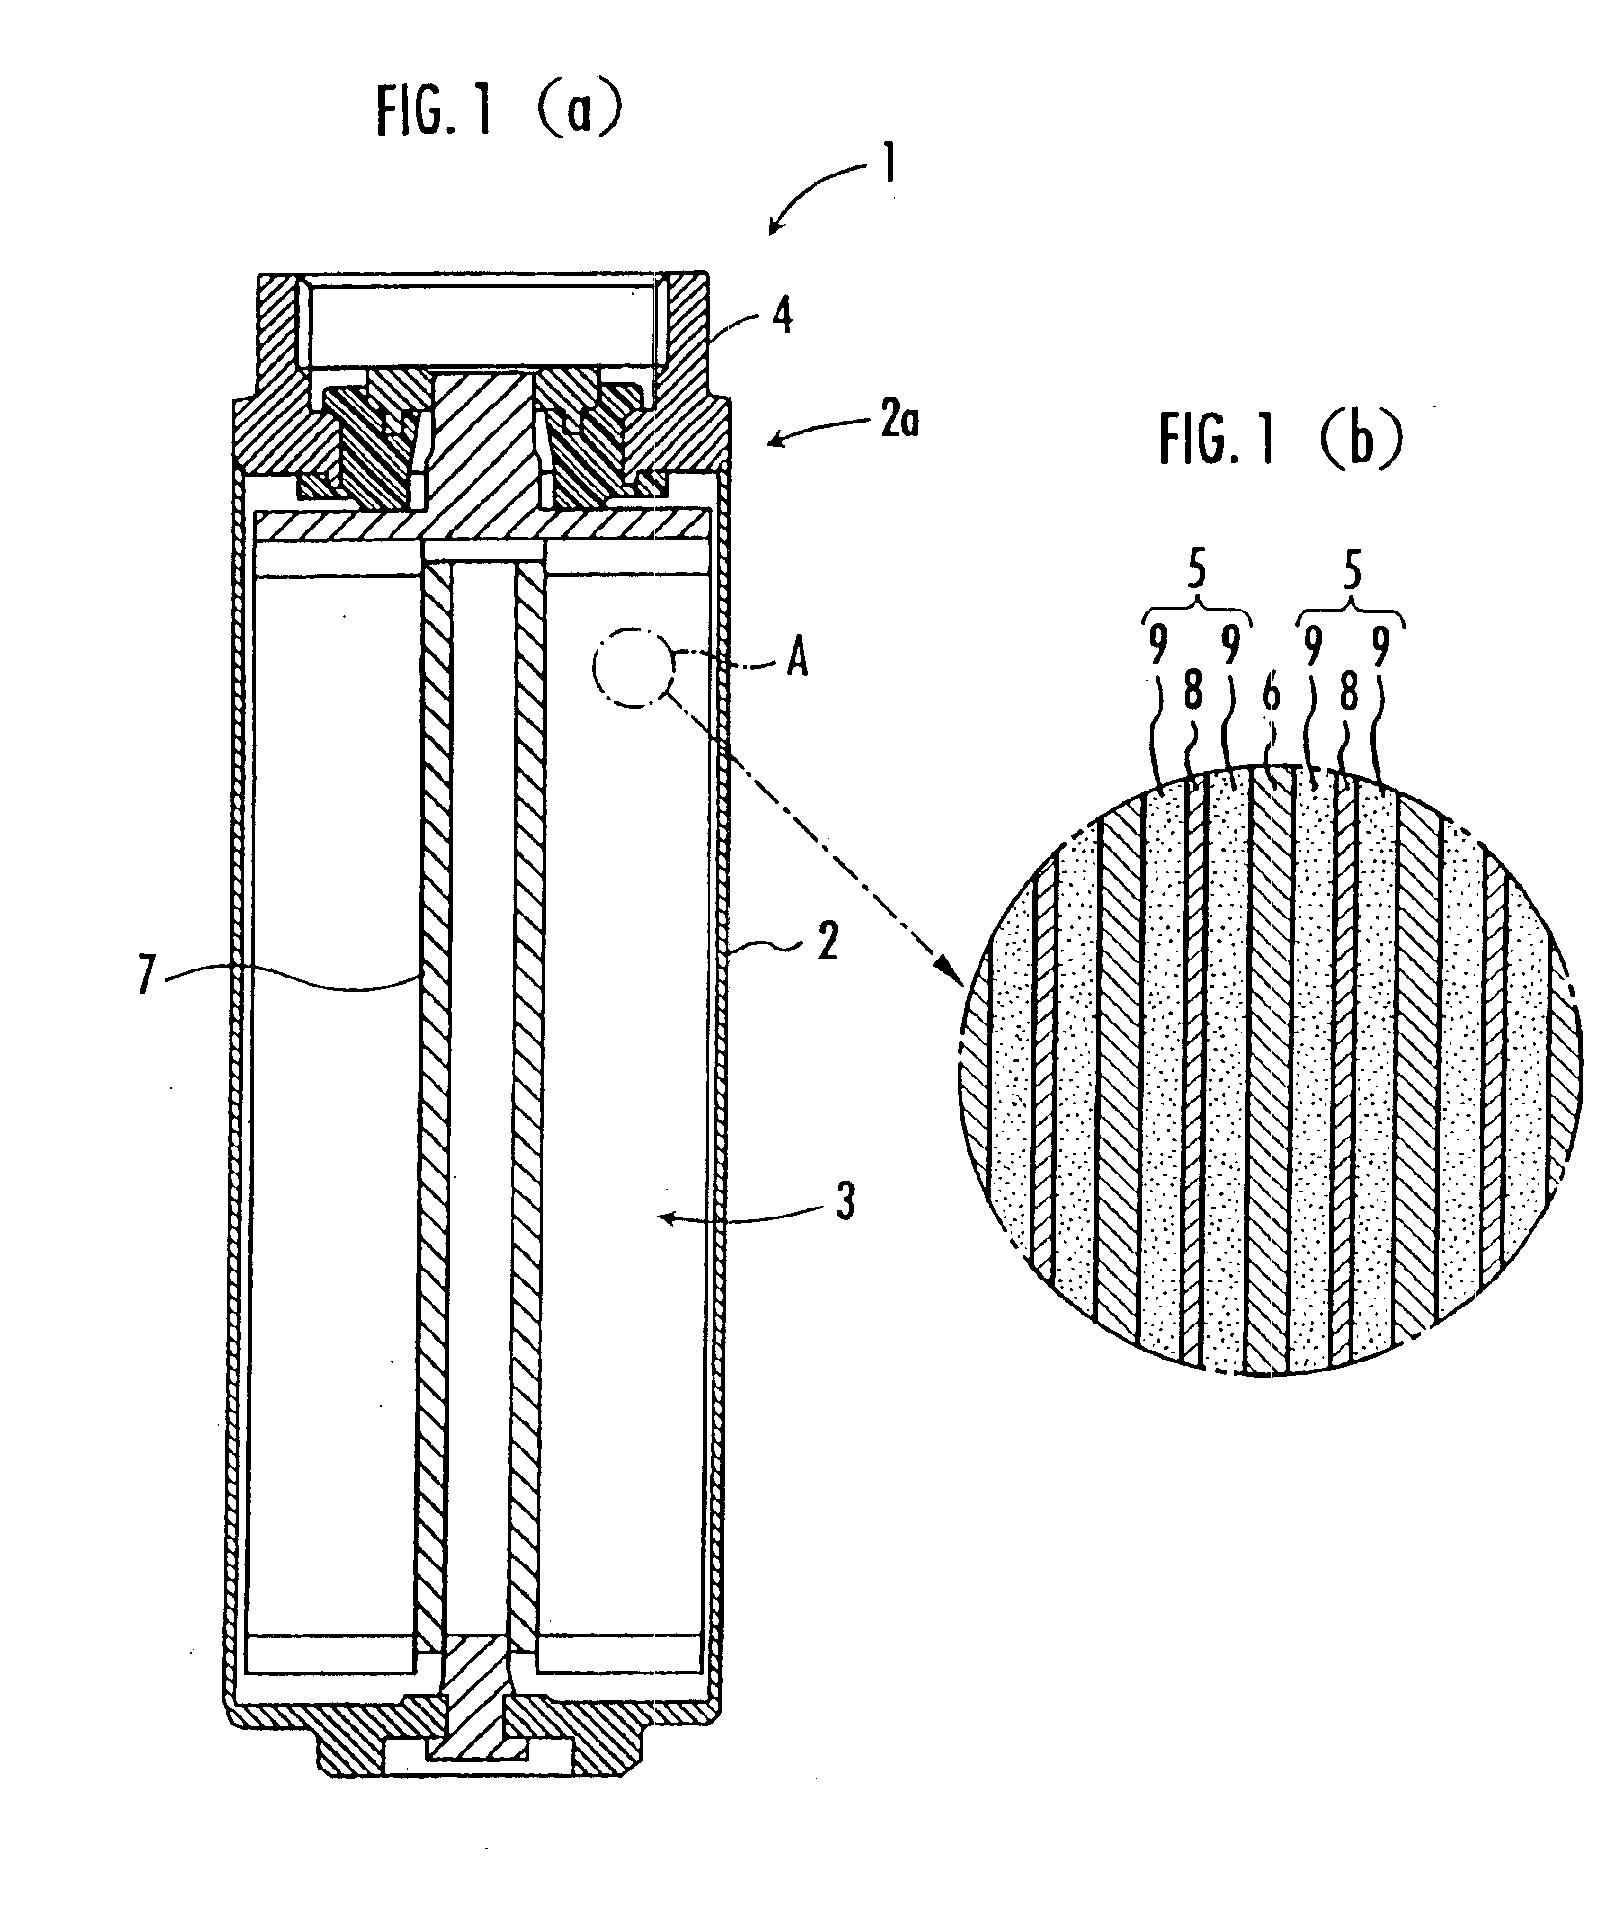 Electrical double-layer capacitor